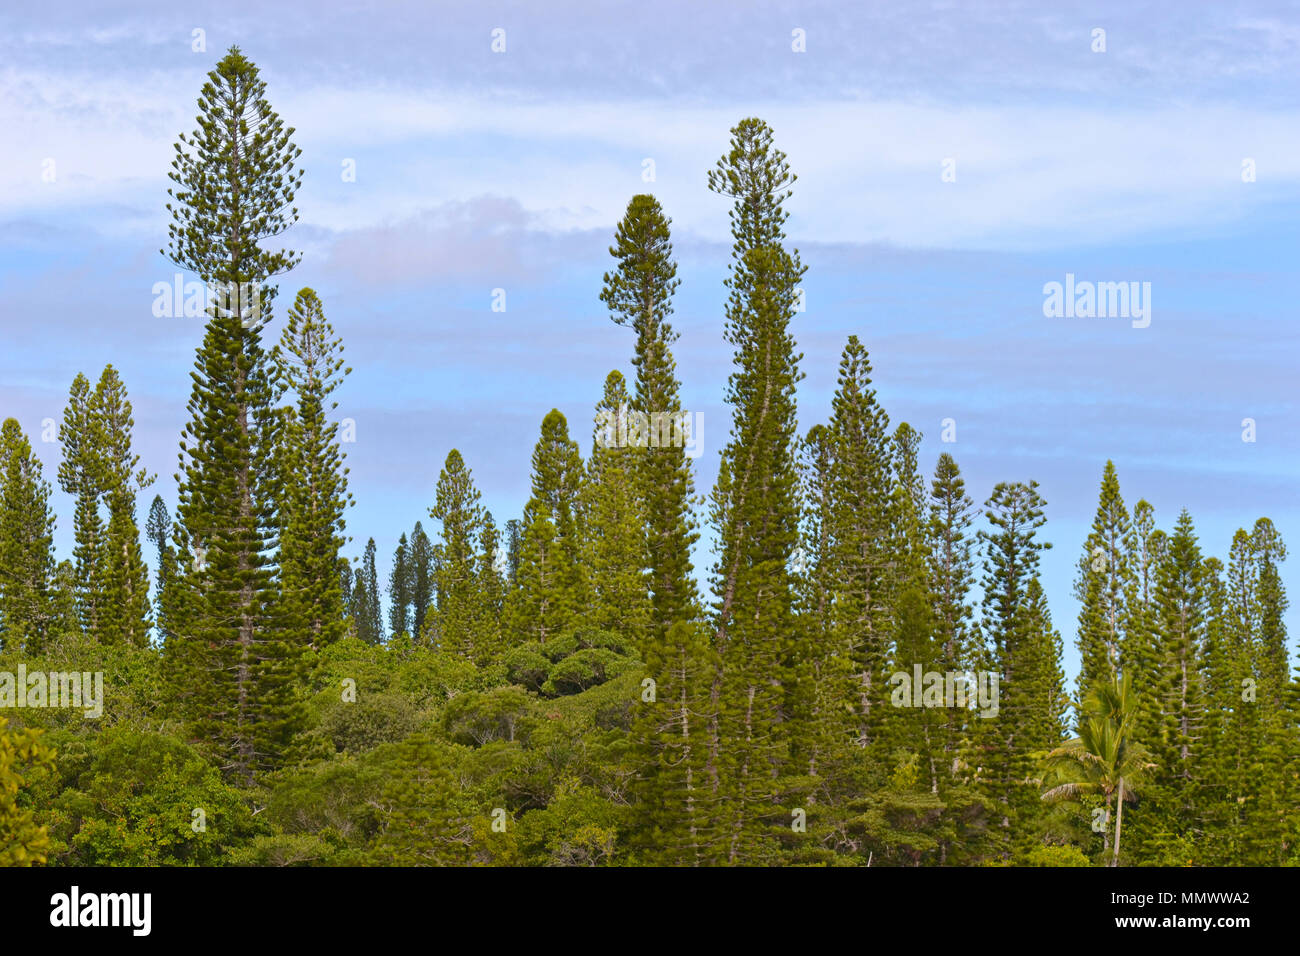 The endemic Cook pines or coral reef araucaria, Araucaria columnaris, Isle of Pines, New Caledonia, South Pacific Stock Photo